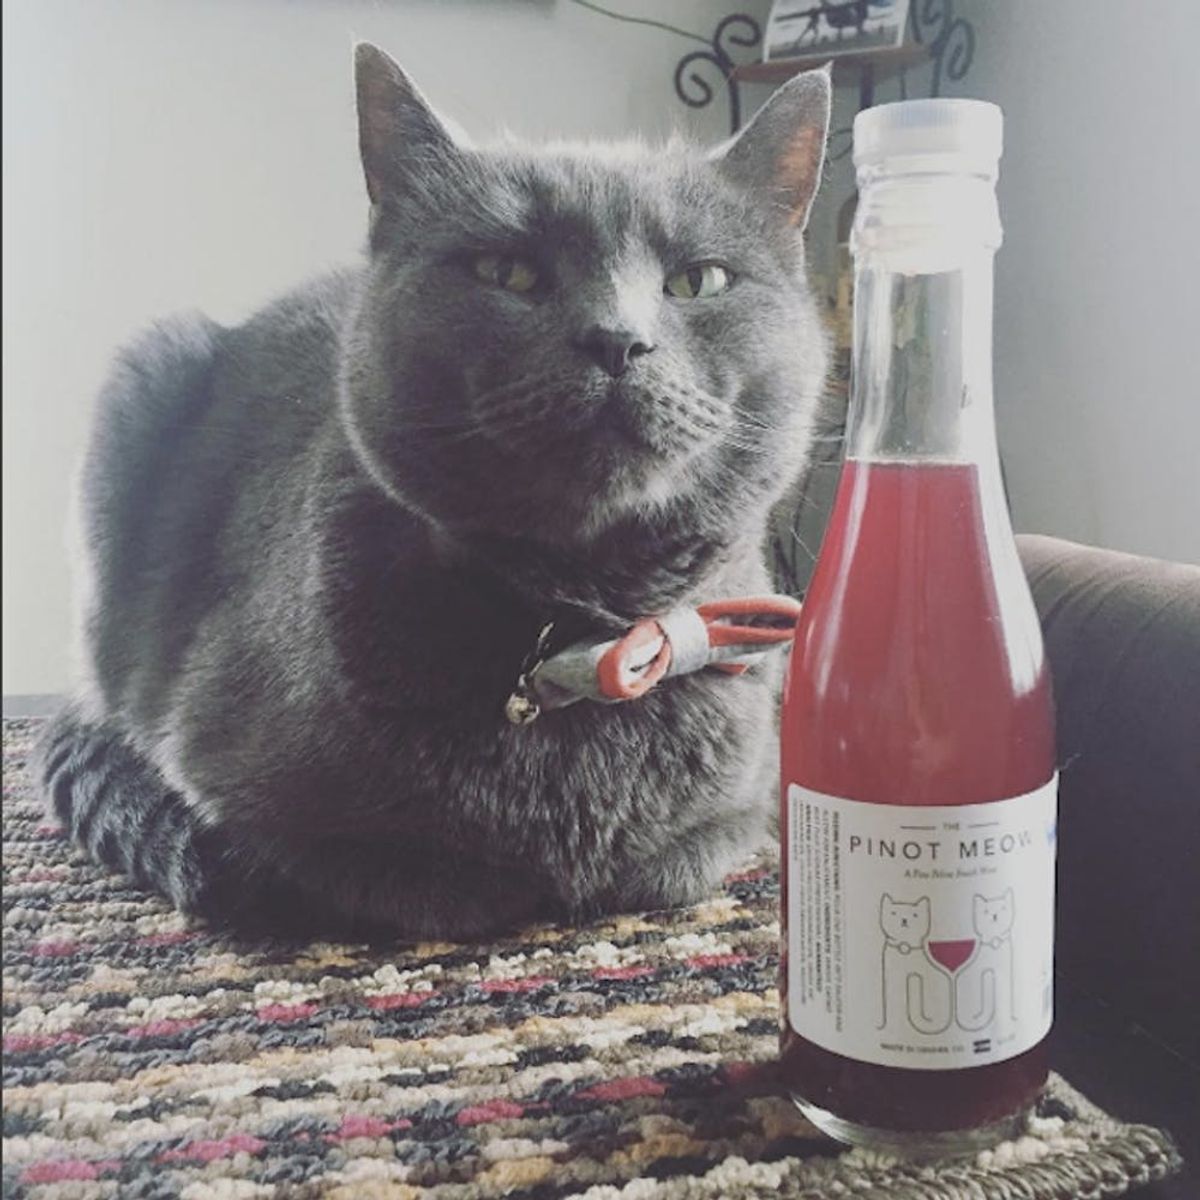 Cat Wine Is Now a Real Thing and Here’s Why You’ll Want It